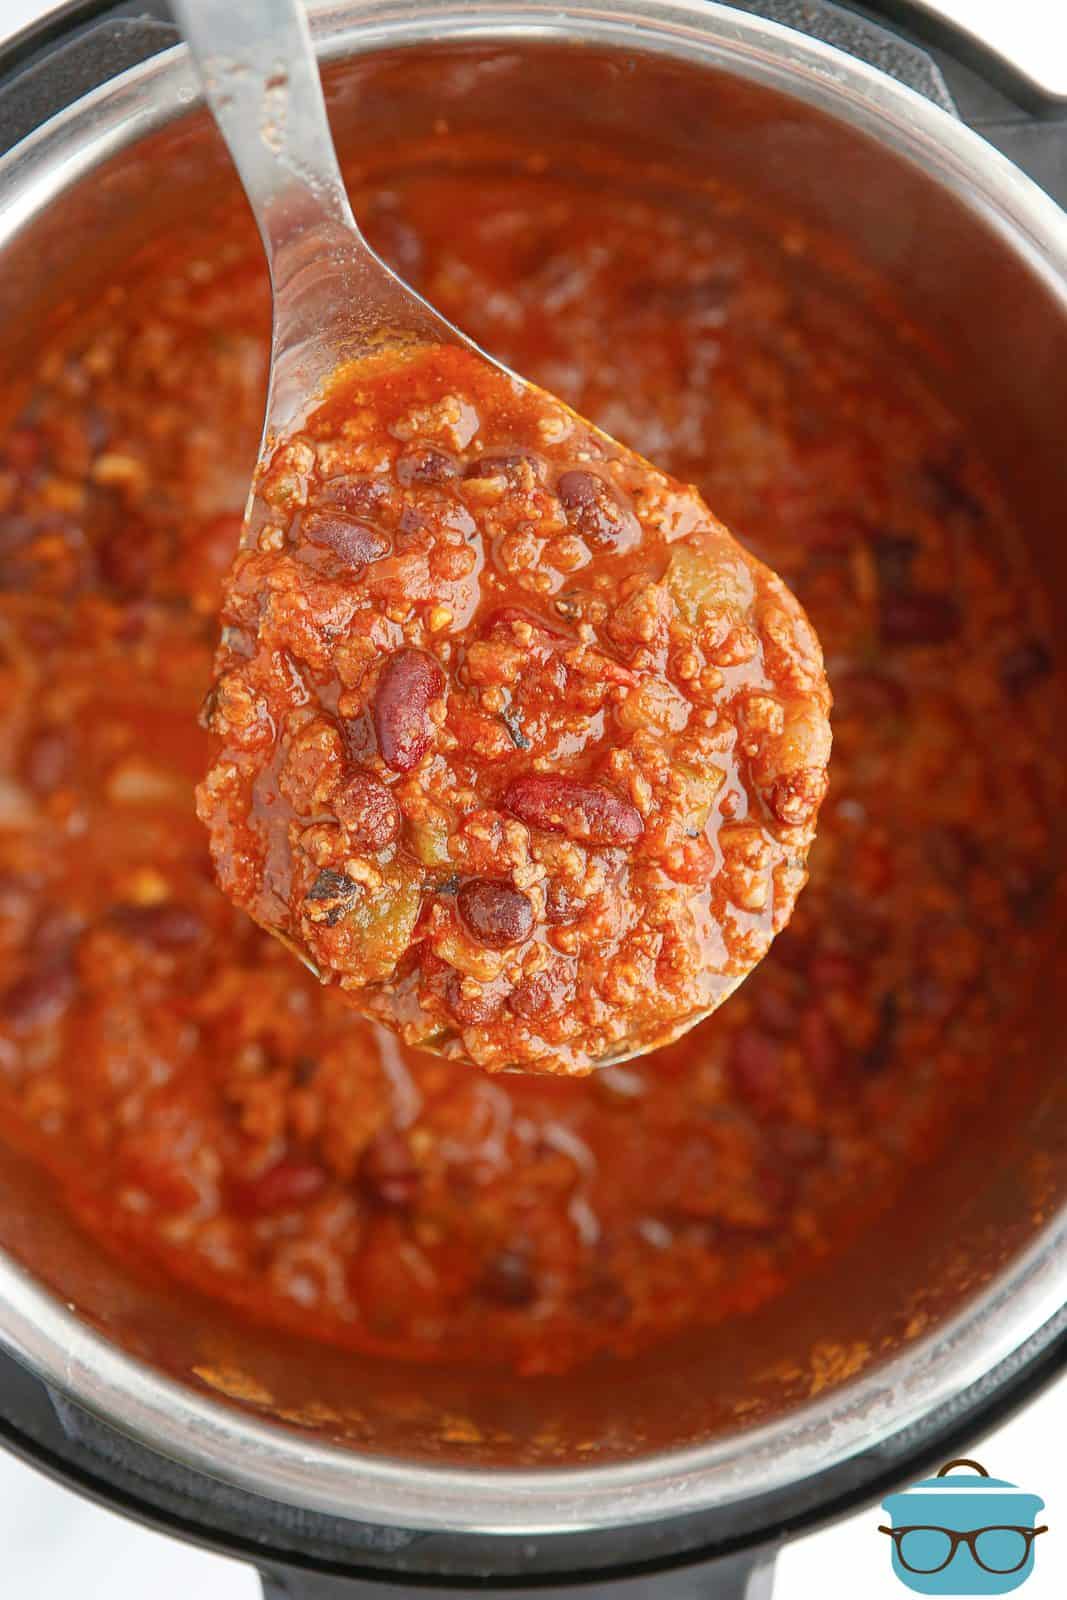 Spoon with Instant Pot Chili Recipe on it over instant pot.